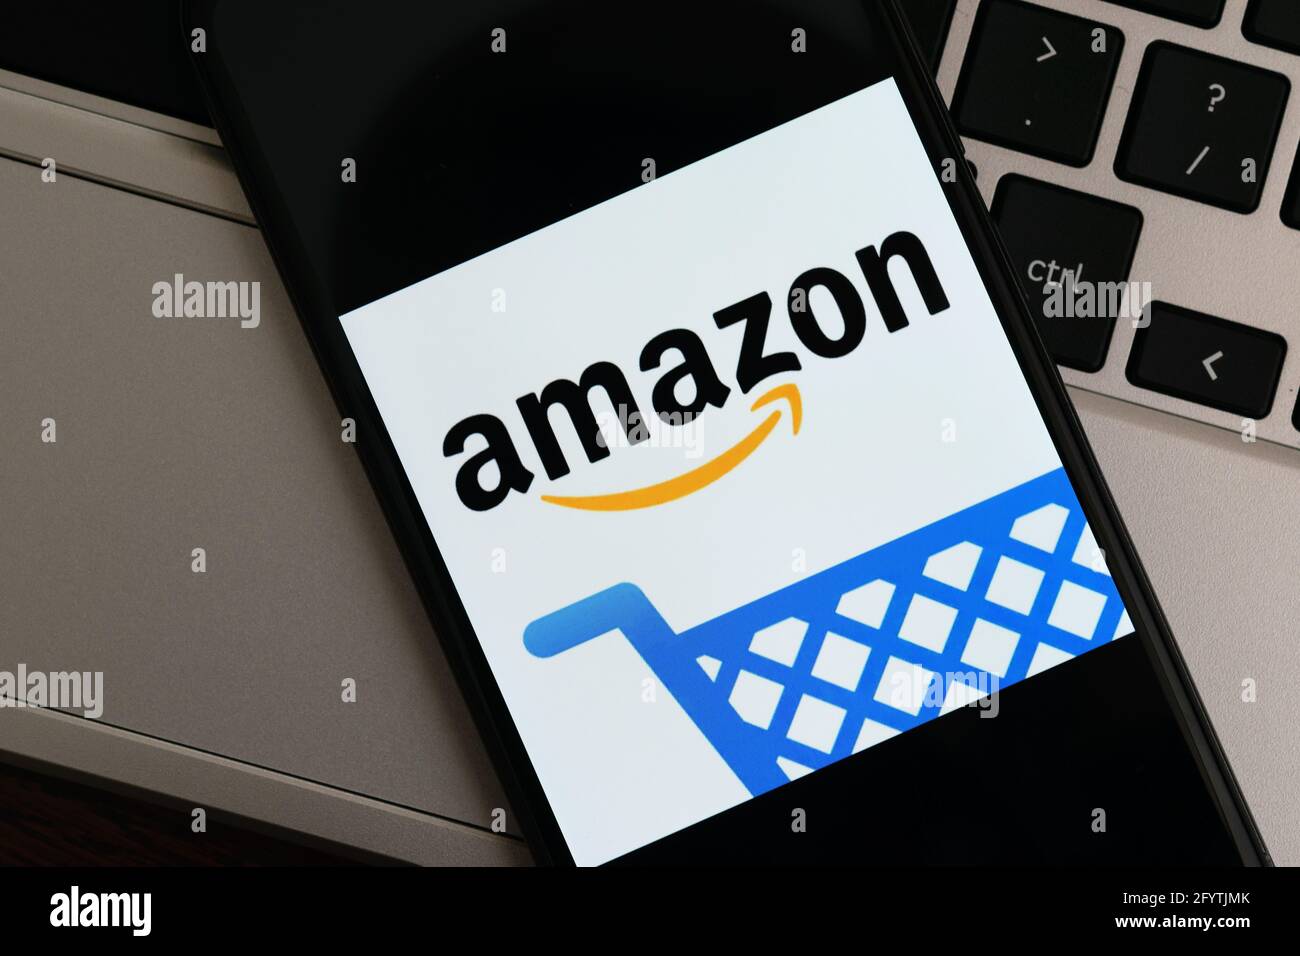 Krakow, Poland - September 30, 2020: Amazon application sign on the screen smartphone. Amazon is the most famous online retailer in the world Stock Photo